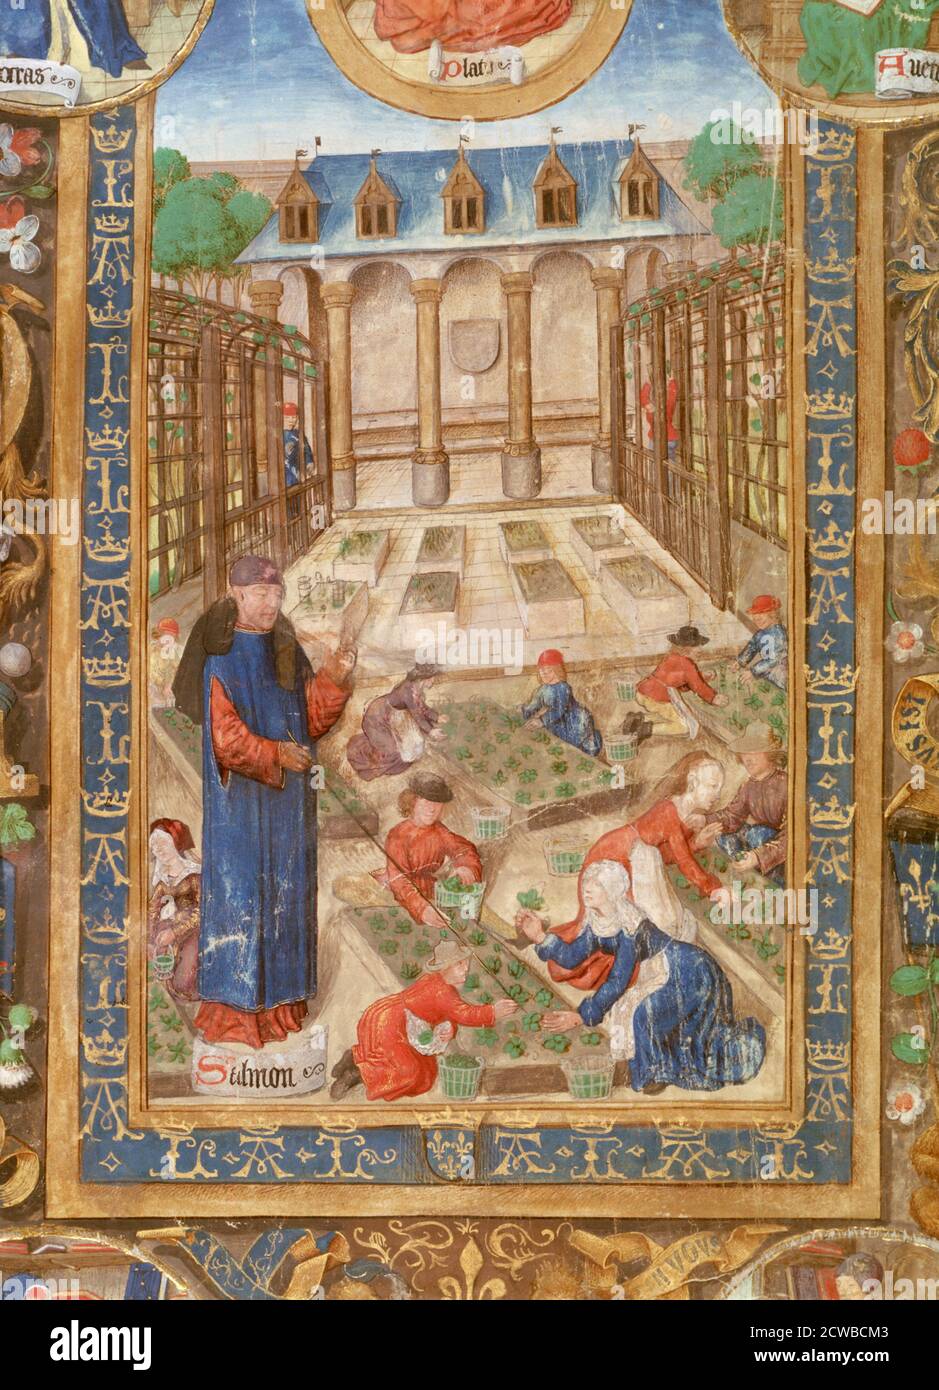 Pharmaceutical garden, 15th century. The scene shows the collection of medicinal plants in a medieval garden. The illustration from 'Livre des simples medecines', in the collection of the Bibliotheque Nationale, Paris. The artist is unknown. Stock Photo